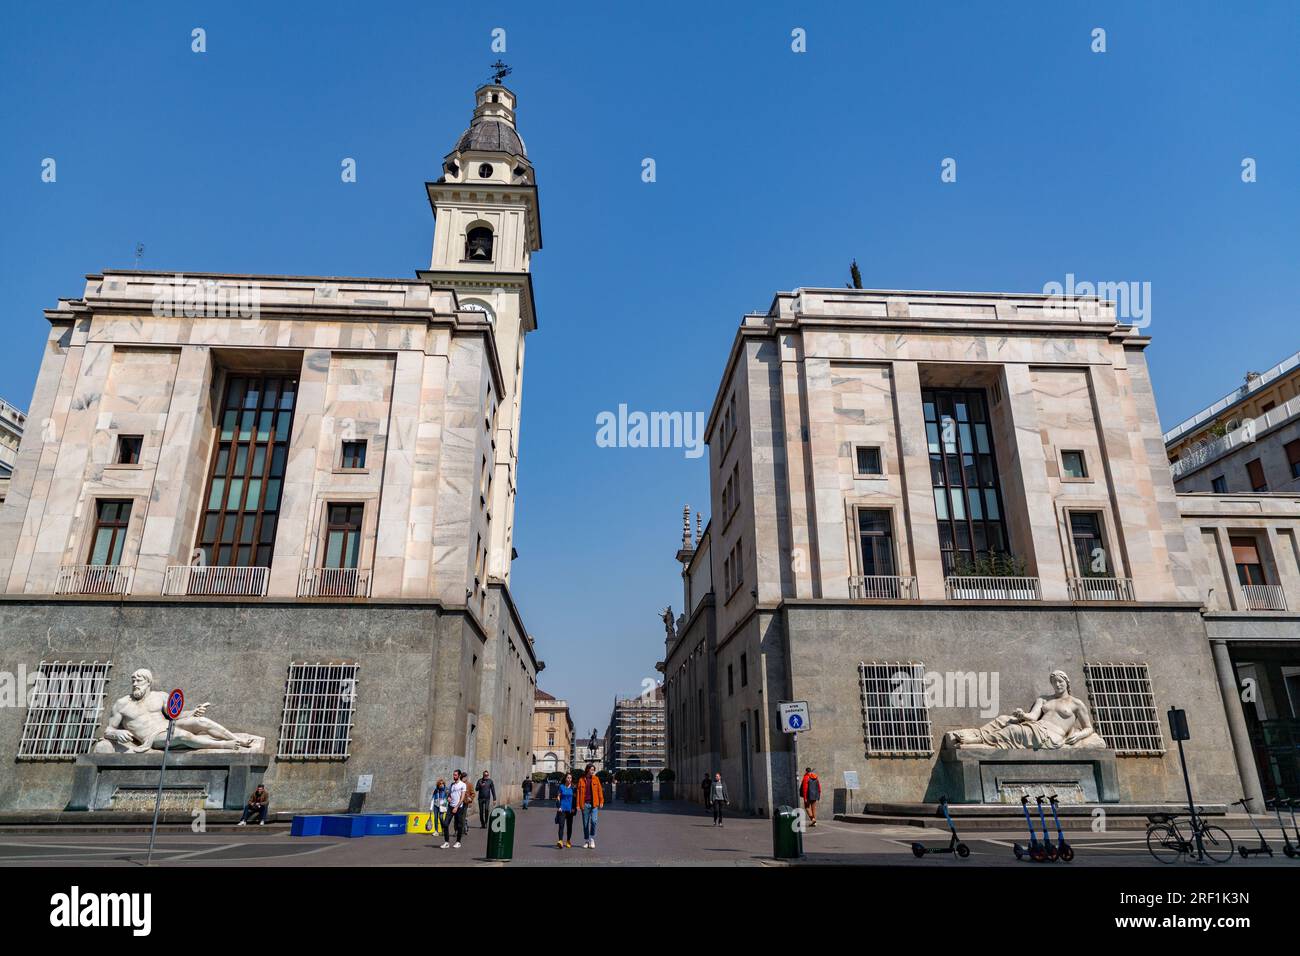 Turin, Italy - March 28, 2022: Piazza CLN is a small square located in the historic center of Turin, just behind the two twin churches of Piazza San C Stock Photo